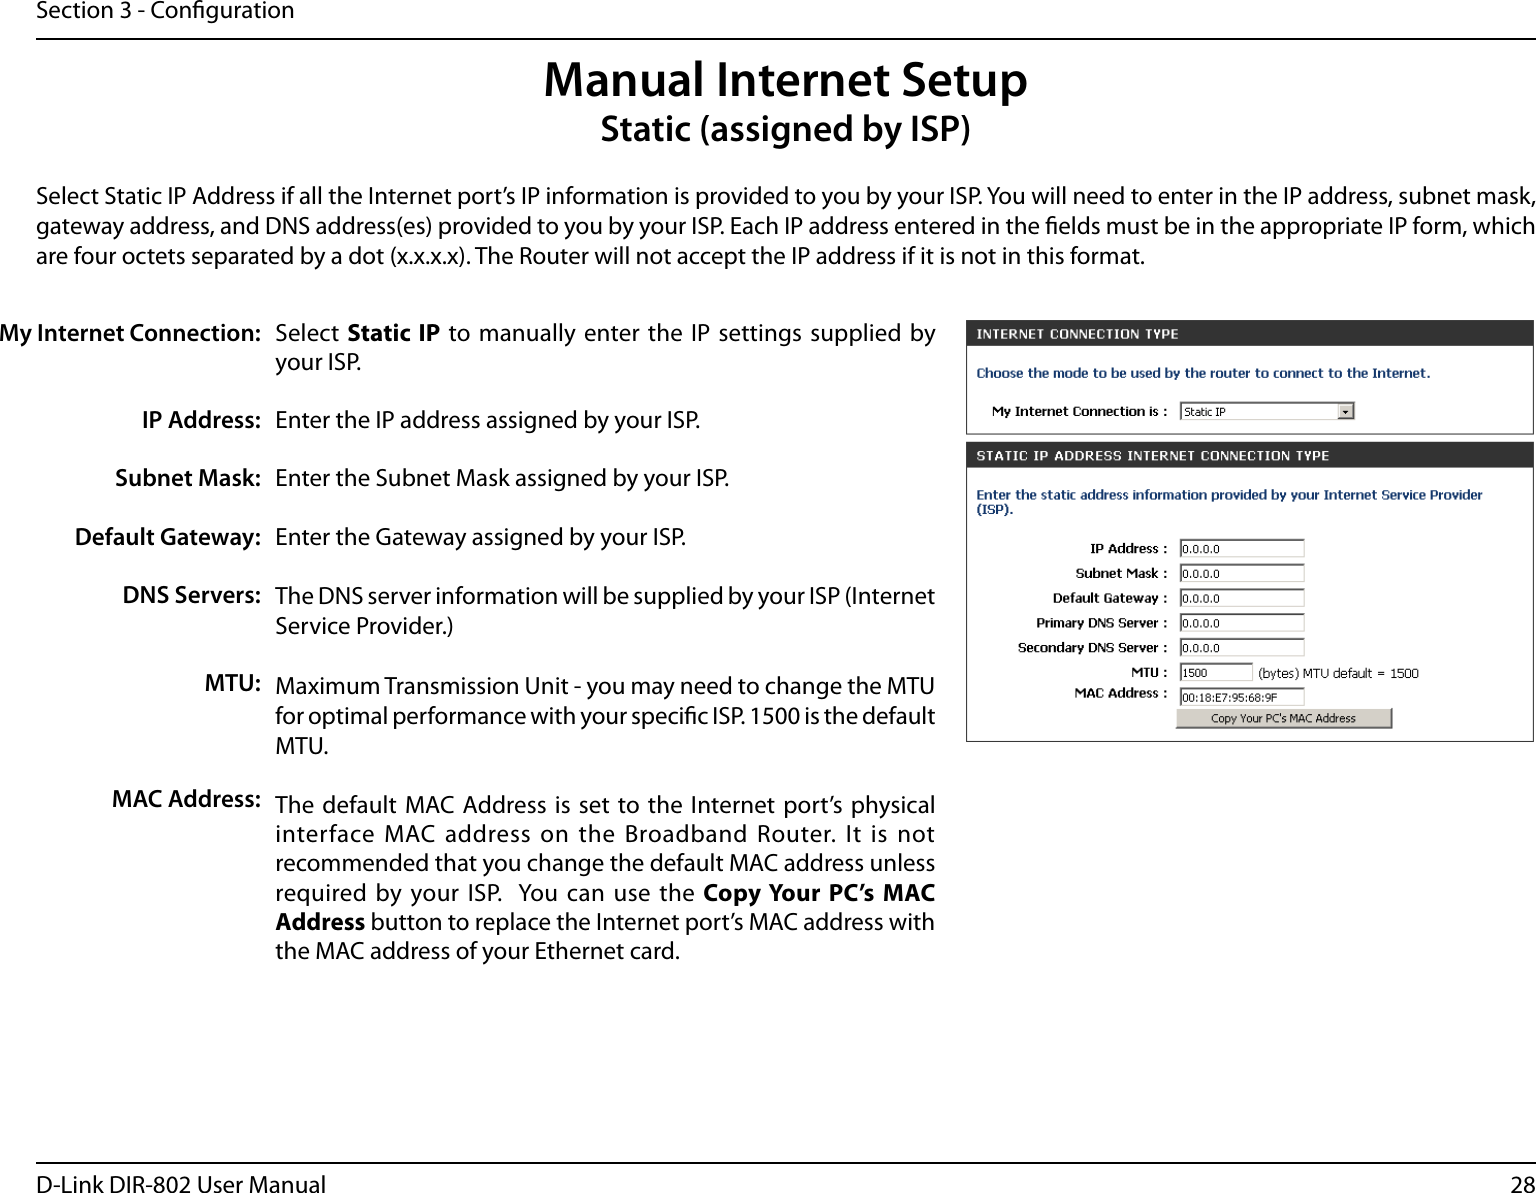 28D-Link DIR-802 User ManualSection 3 - CongurationSelect  Static IP to manually  enter the  IP settings supplied  by your ISP.Enter the IP address assigned by your ISP.Enter the Subnet Mask assigned by your ISP.Enter the Gateway assigned by your ISP.The DNS server information will be supplied by your ISP (Internet Service Provider.)Maximum Transmission Unit - you may need to change the MTU for optimal performance with your specic ISP. 1500 is the default MTU.The default MAC Address is set to the Internet port’s physical interface  MAC address on the  Broadband Router.  It is  not recommended that you change the default MAC address unless required by your ISP.   You  can use the Copy Your  PC’s  MAC Address button to replace the Internet port’s MAC address with the MAC address of your Ethernet card.My Internet Connection:IP Address:Subnet Mask:Default Gateway:DNS Servers:MTU:MAC Address:Manual Internet SetupStatic (assigned by ISP)Select Static IP Address if all the Internet port’s IP information is provided to you by your ISP. You will need to enter in the IP address, subnet mask, gateway address, and DNS address(es) provided to you by your ISP. Each IP address entered in the elds must be in the appropriate IP form, which are four octets separated by a dot (x.x.x.x). The Router will not accept the IP address if it is not in this format.